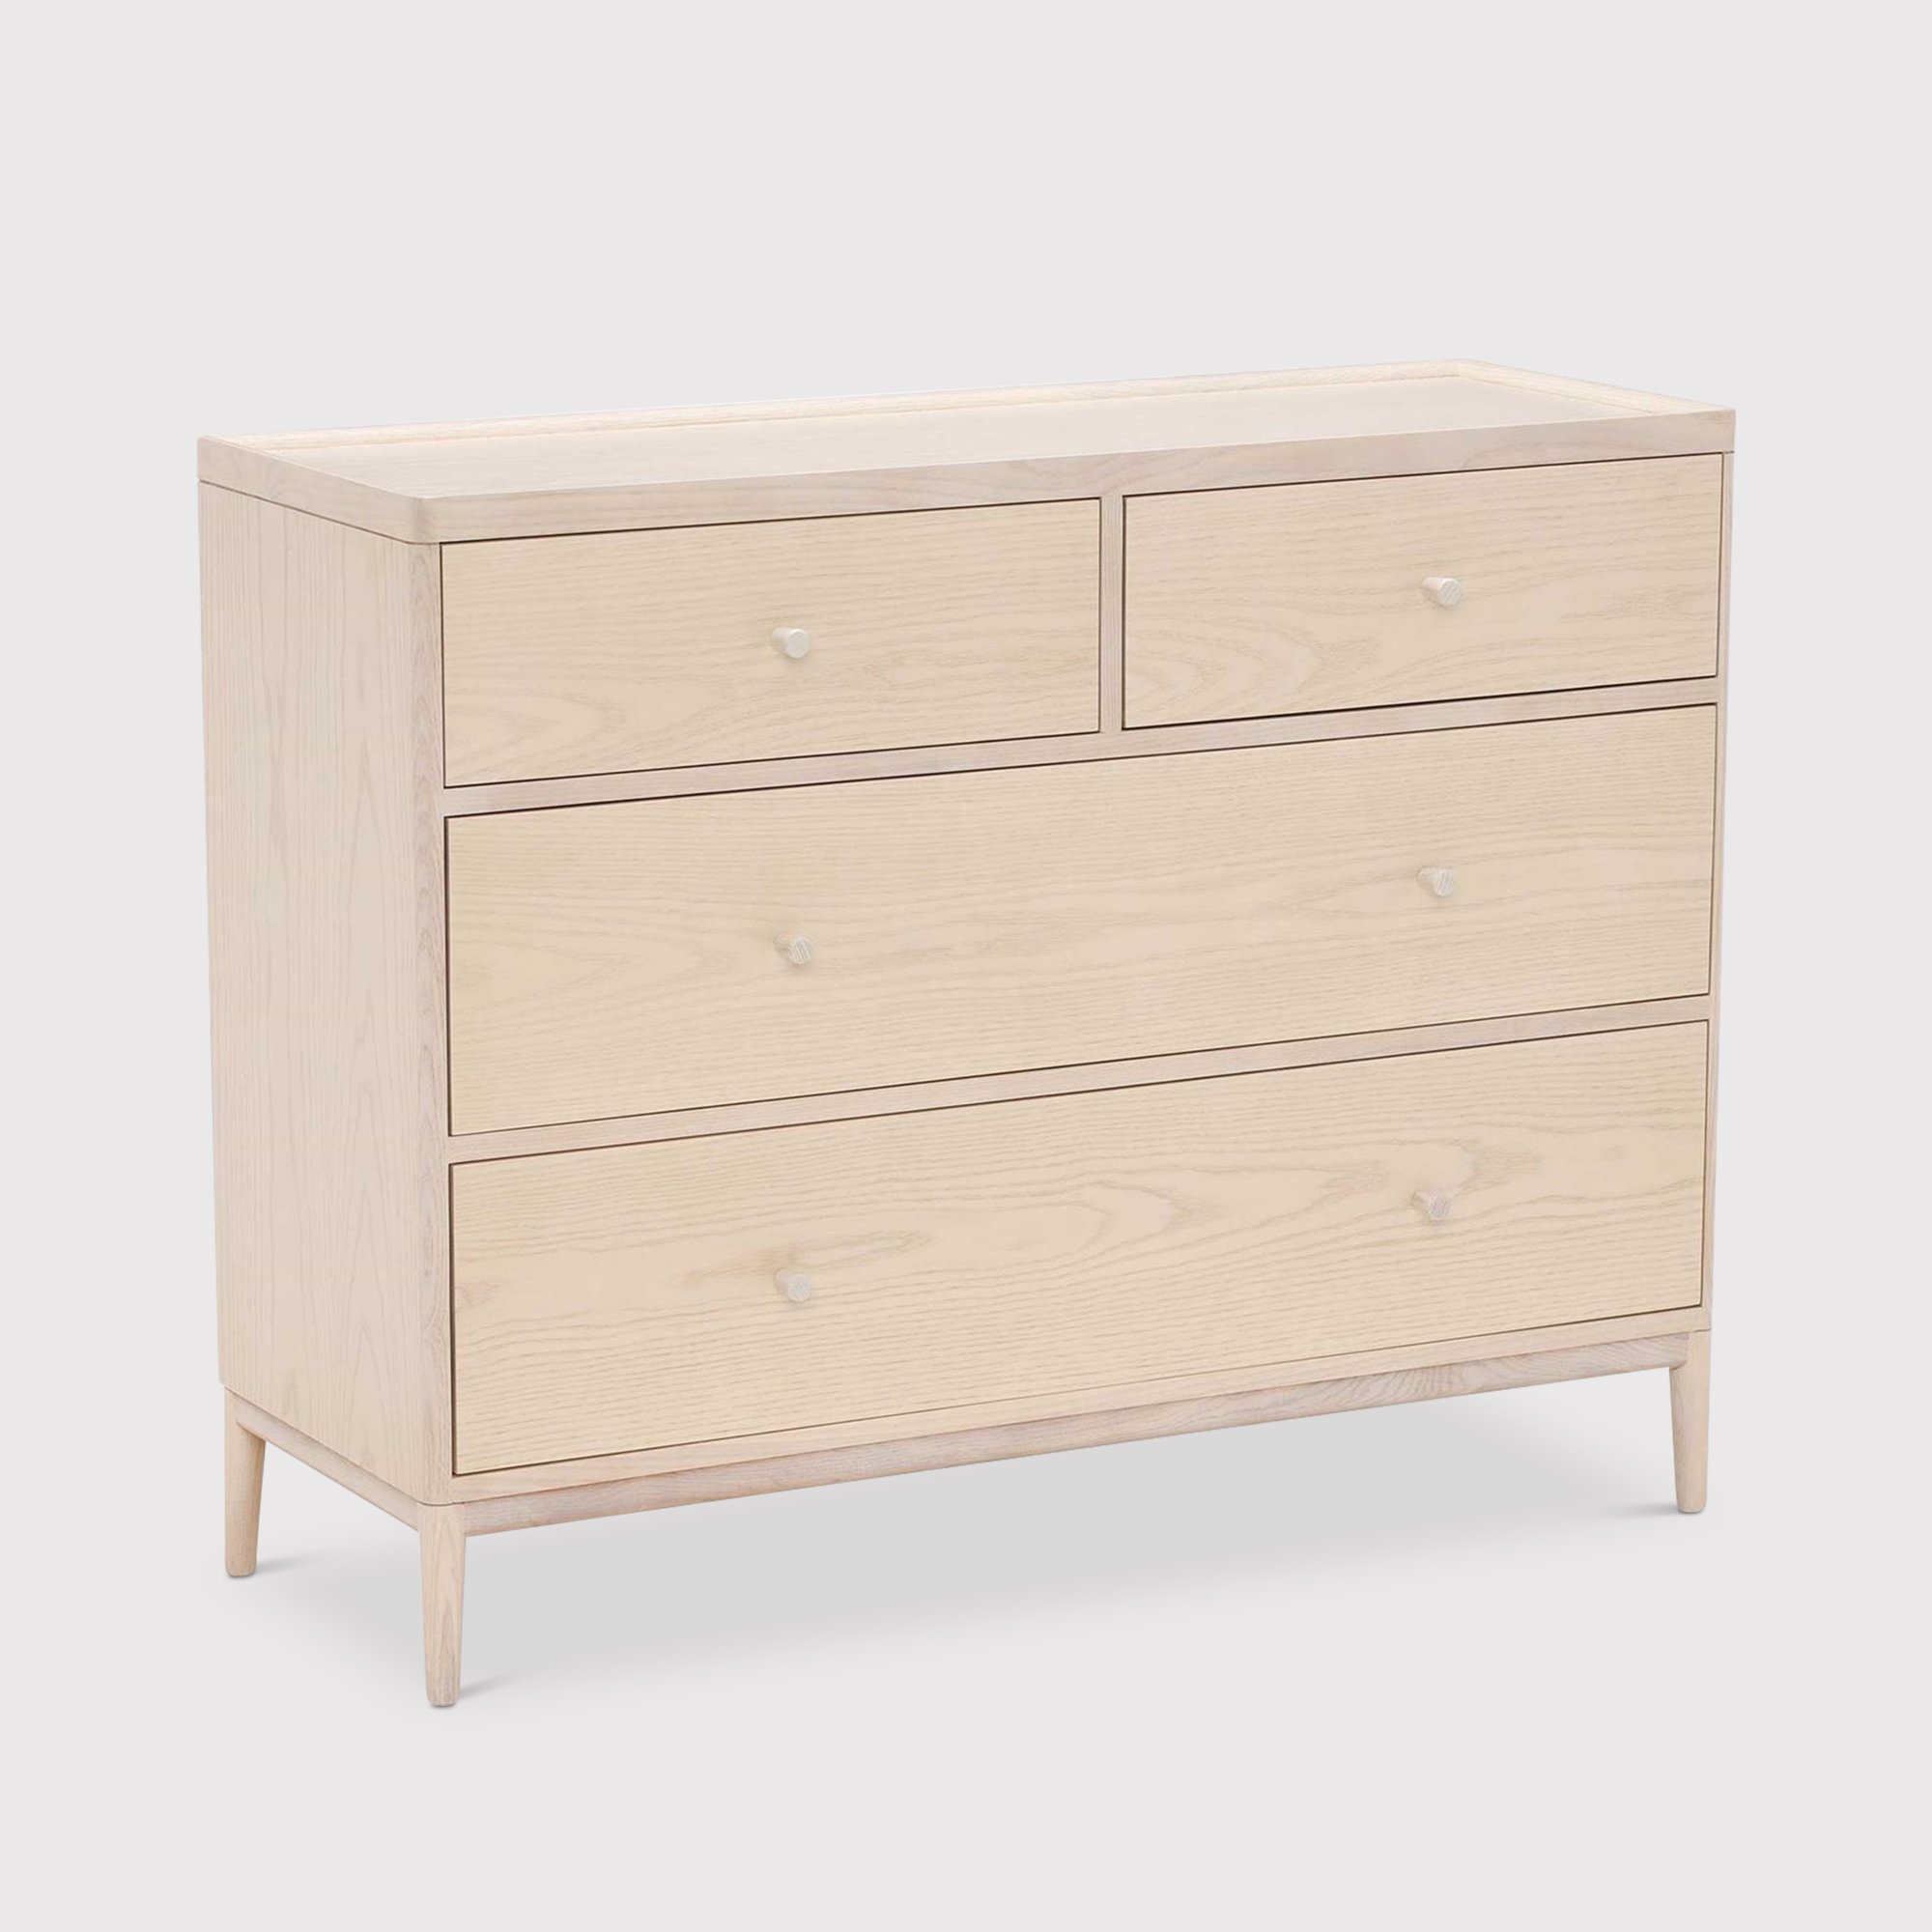 Ercol Salina 4 Drawer Wide Chest | Barker & Stonehouse